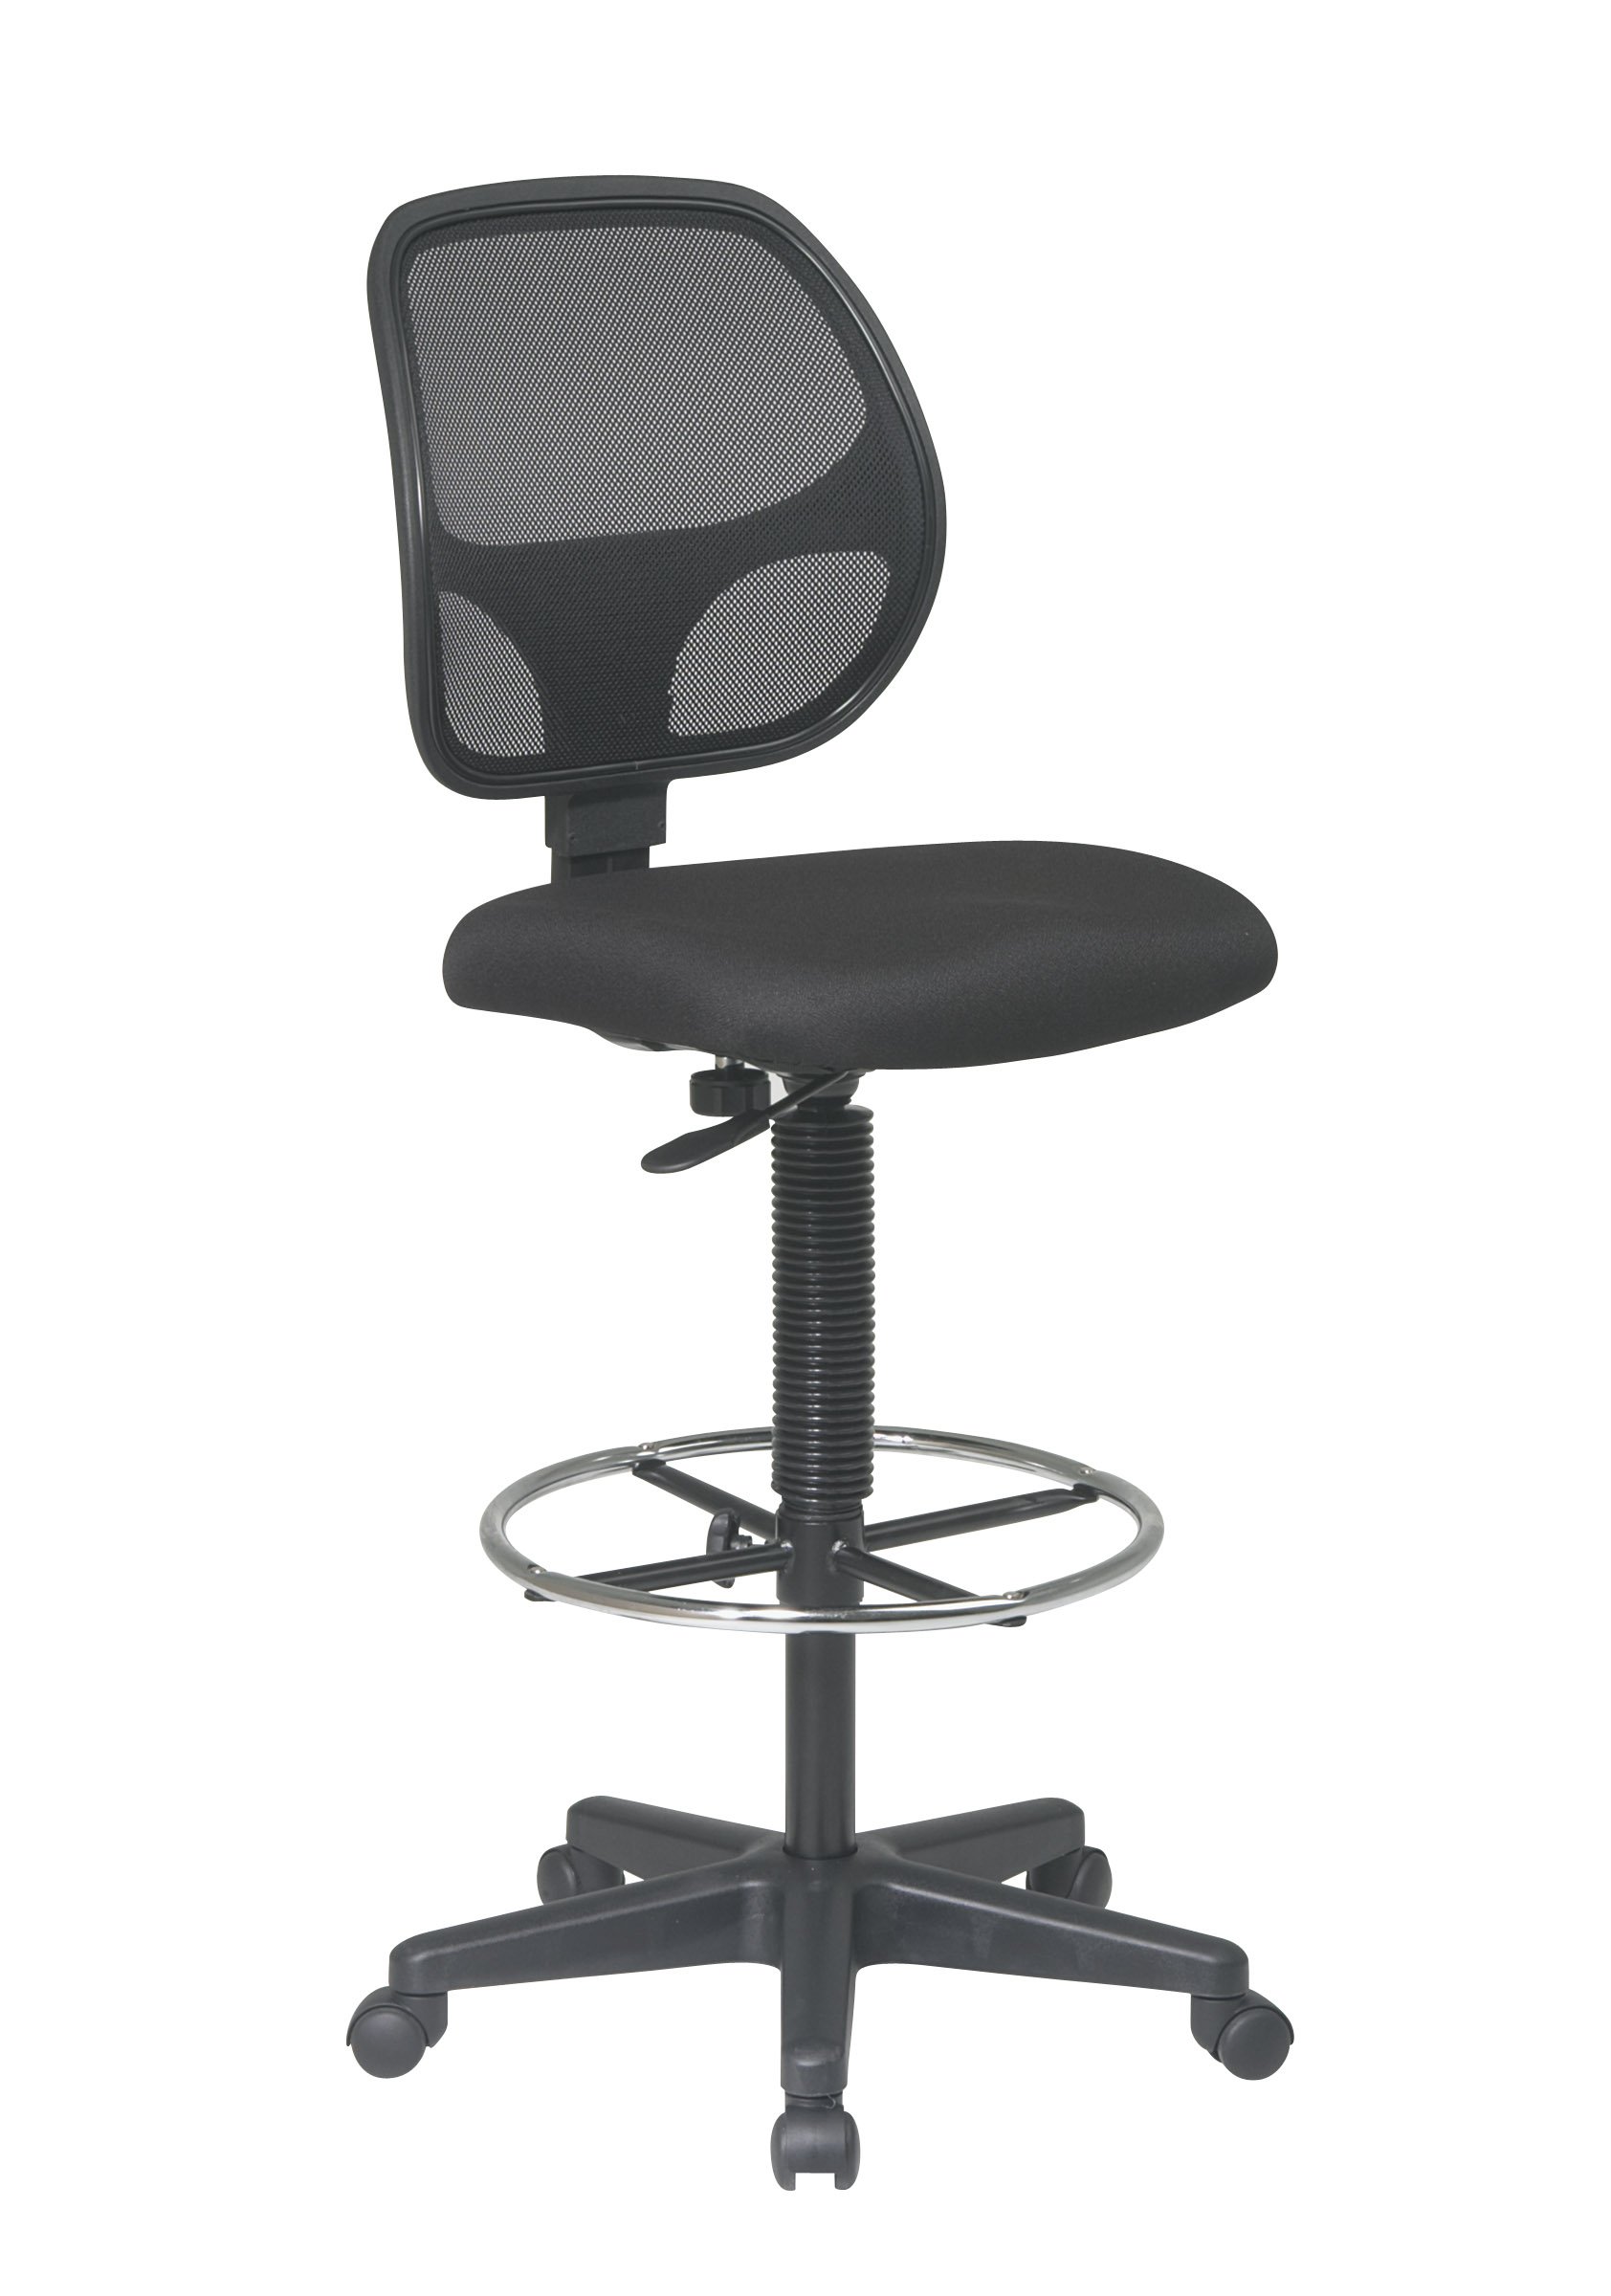 Office Star DC Series Deluxe Breathable Mesh Back Ergonomic Drafting Chair with Lumbar Support and Adjustable Footring, Black Fabric